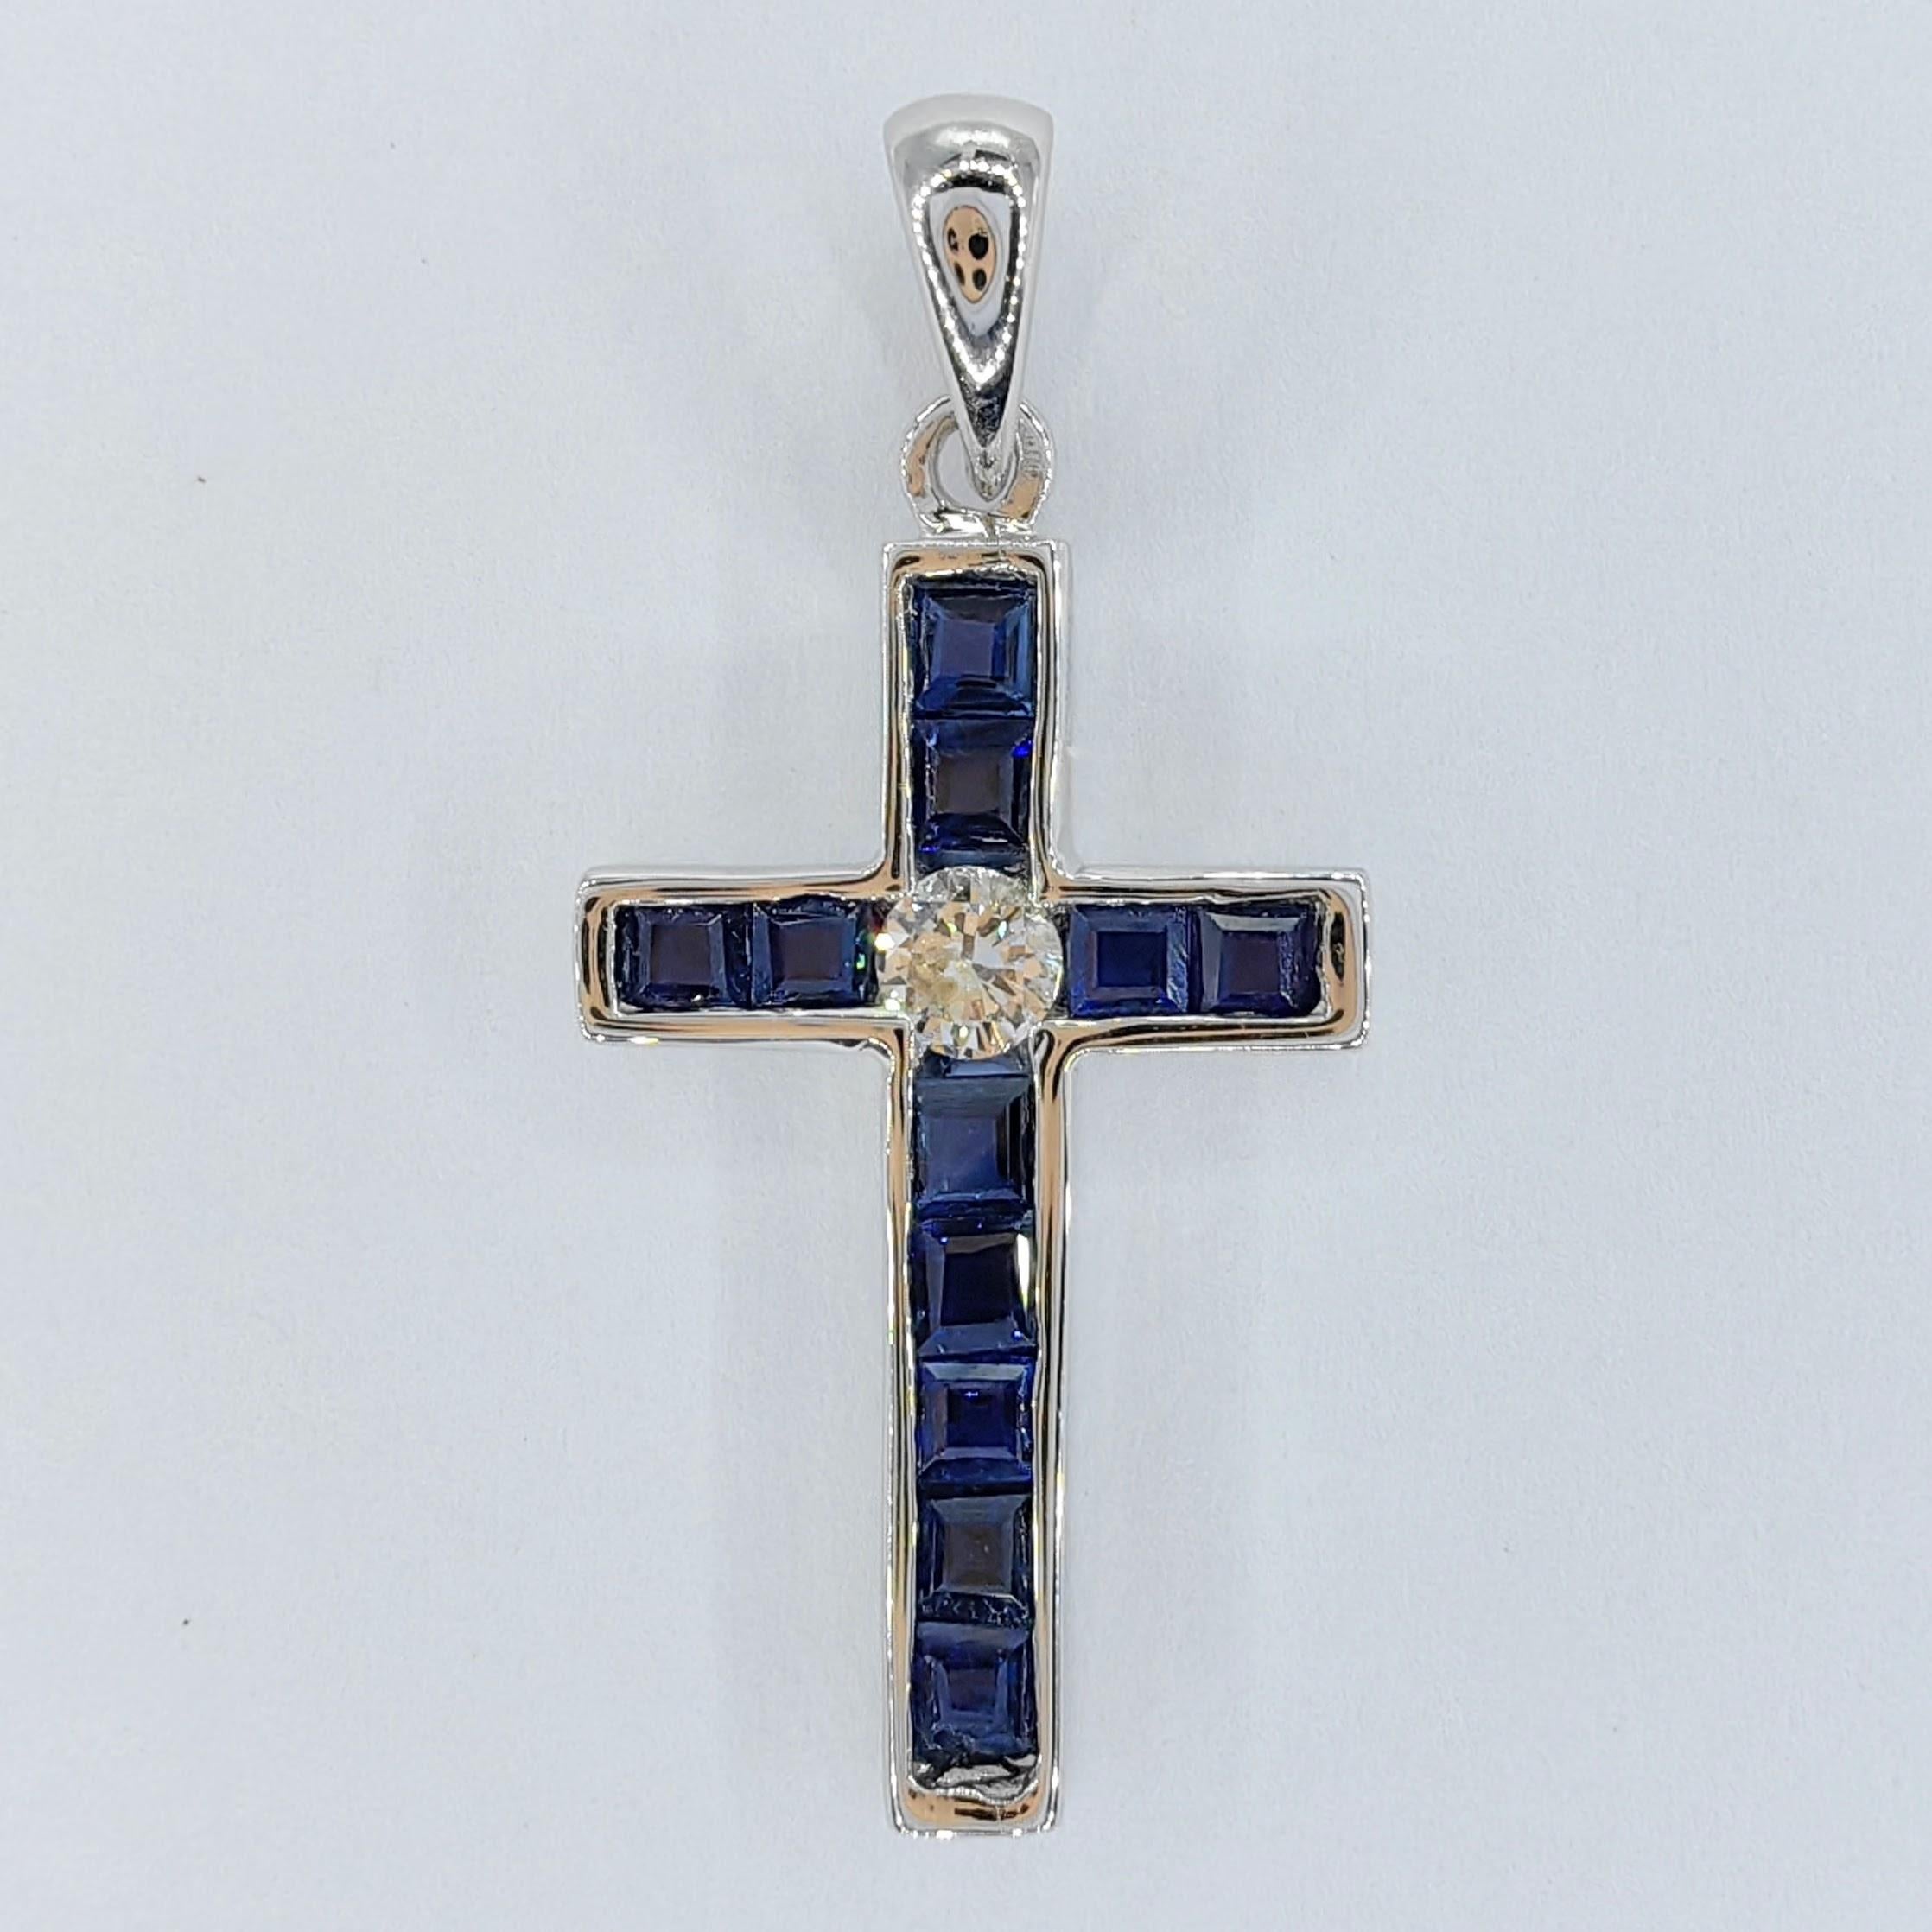 Introducing our exquisite 0.88ct Royal Blue Sapphire & Diamond Cross Necklace Pendant in 18K White Gold. This stunning piece of jewelry combines the regal allure of sapphires with the timeless elegance of diamonds, creating a captivating symbol of